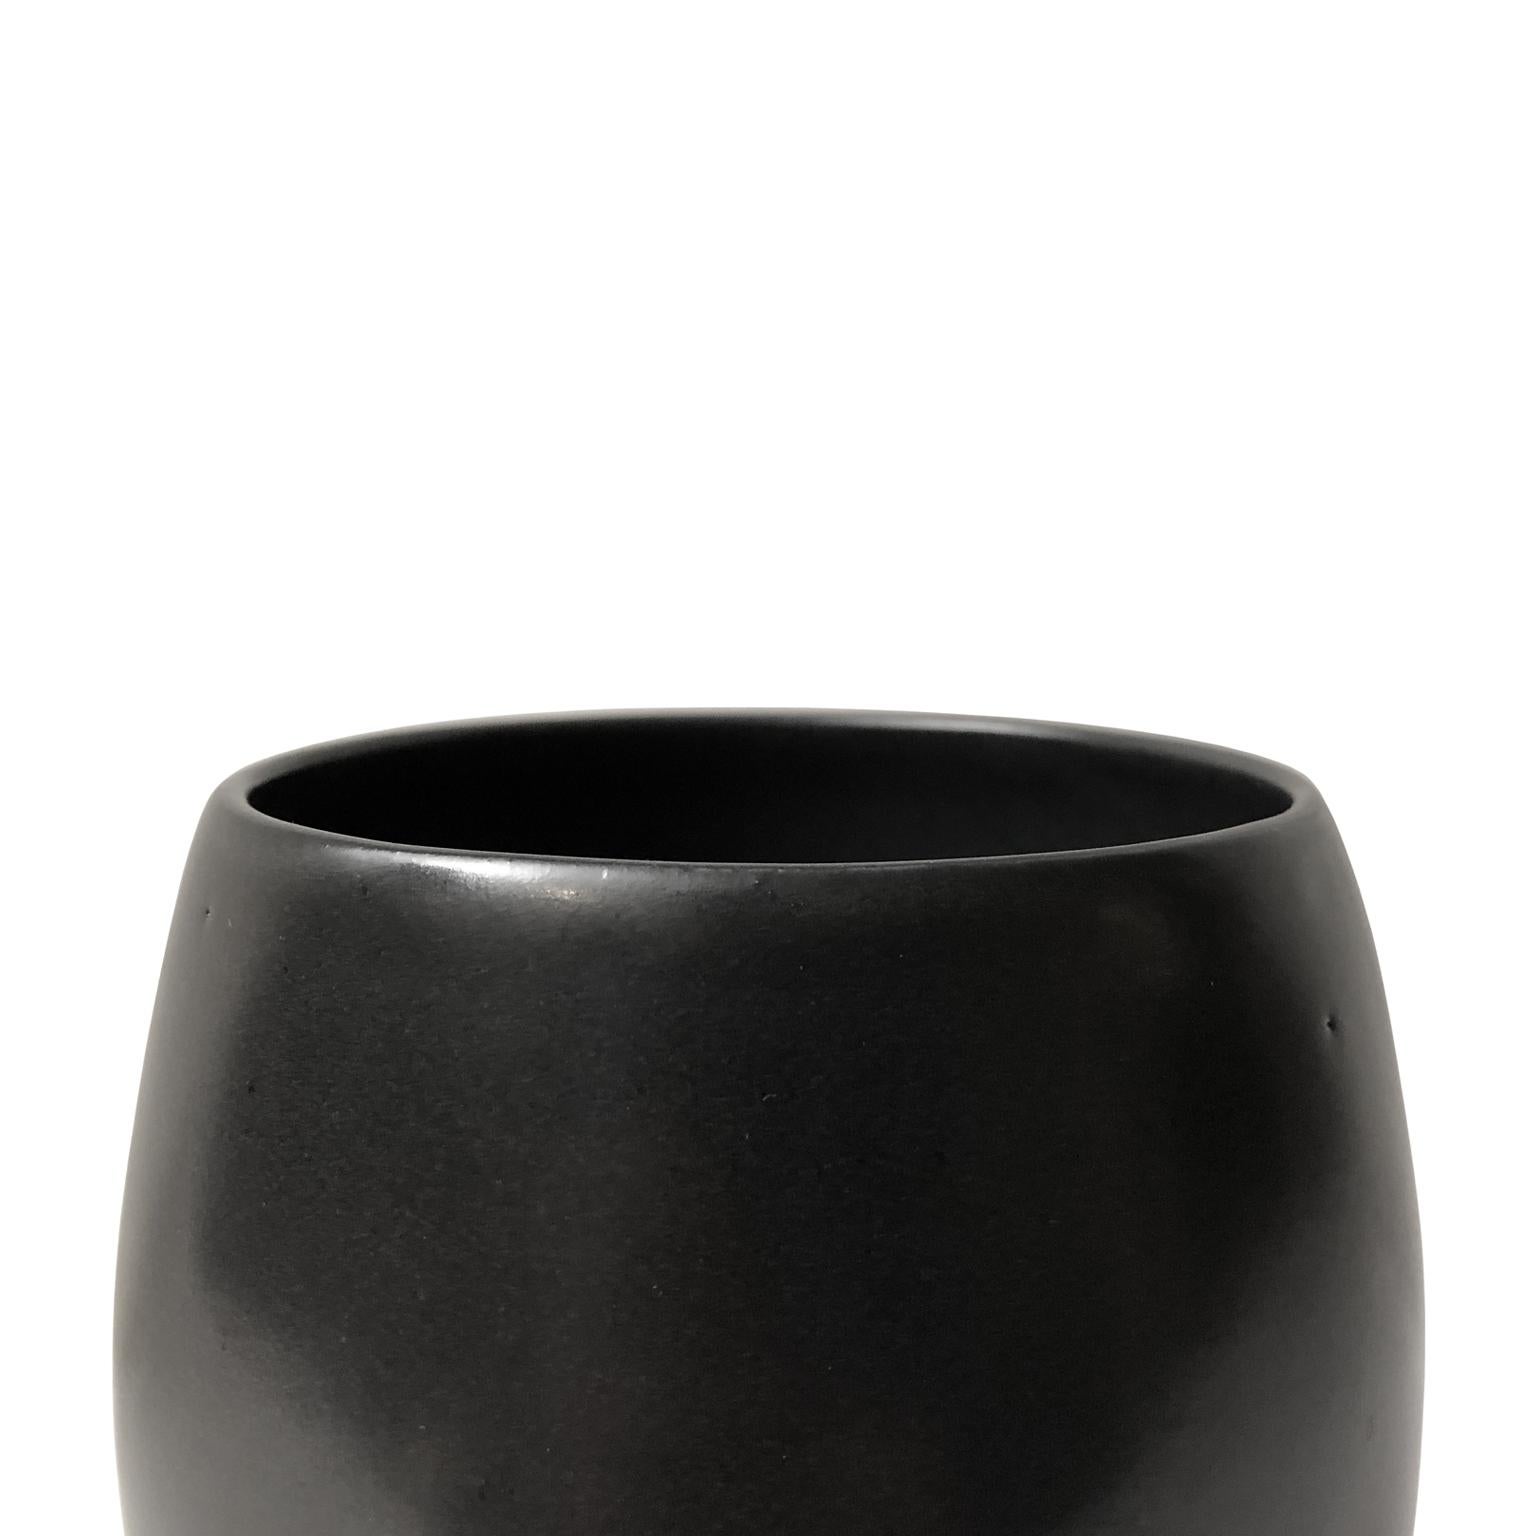 Curved ceramic vase with black lustre glaze and pointed base by Sandi Fellman, 2019.